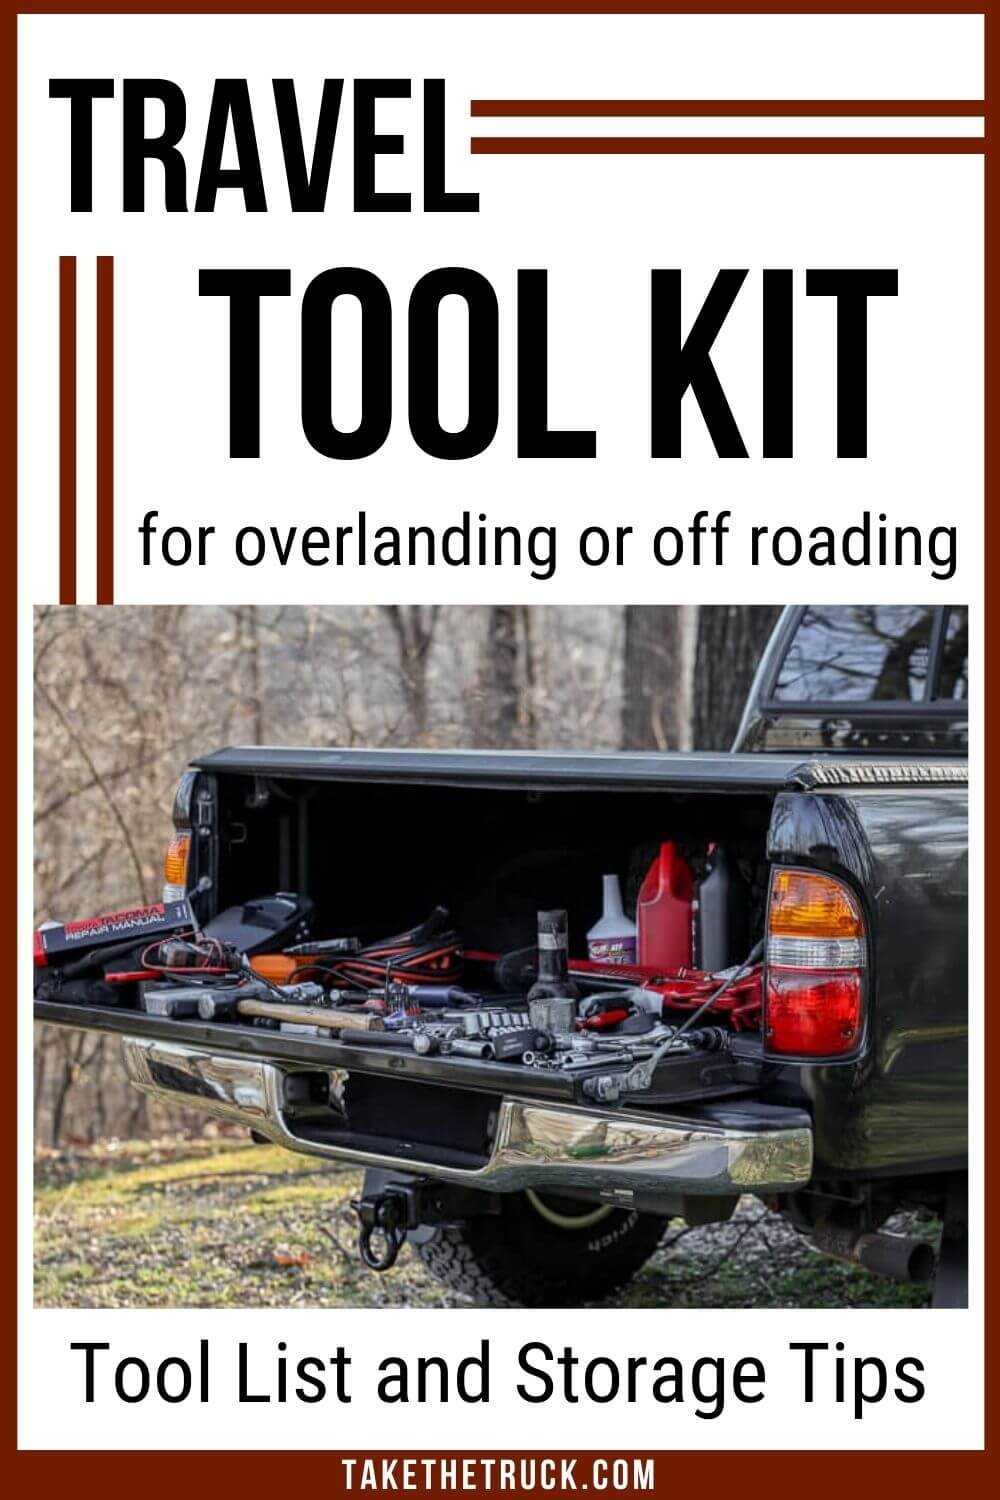 A guide on the off roading tools and overlanding tools you will want to put together into a travel tool kit. Overland tools and off road tools recommendations.